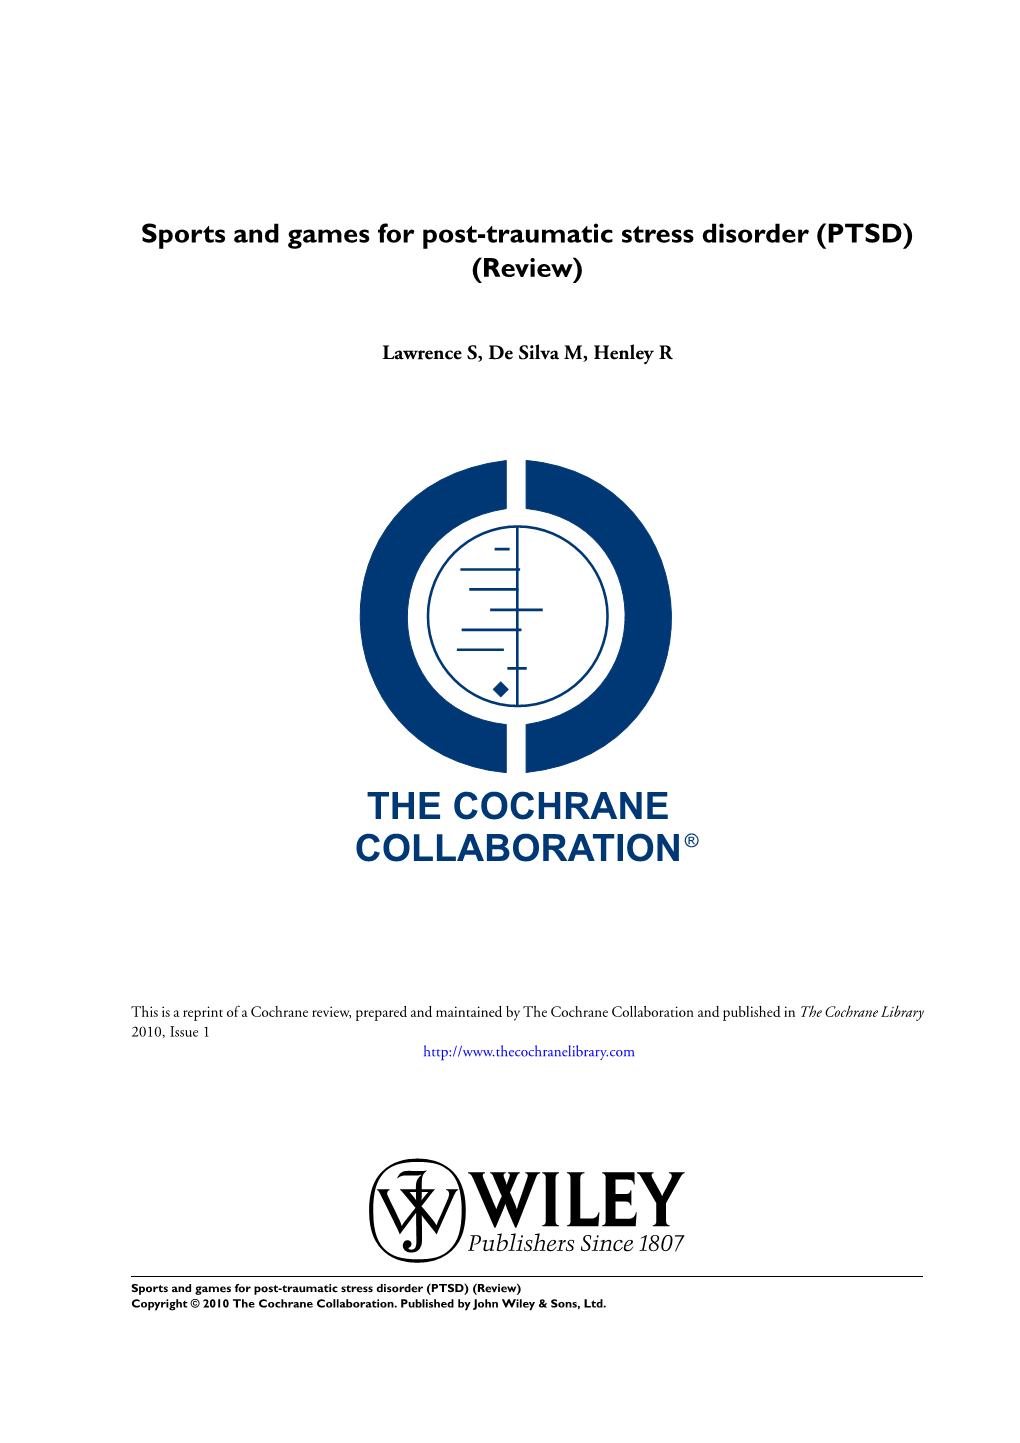 Sports and Games for Post-Traumatic Stress Disorder (PTSD) (Review)